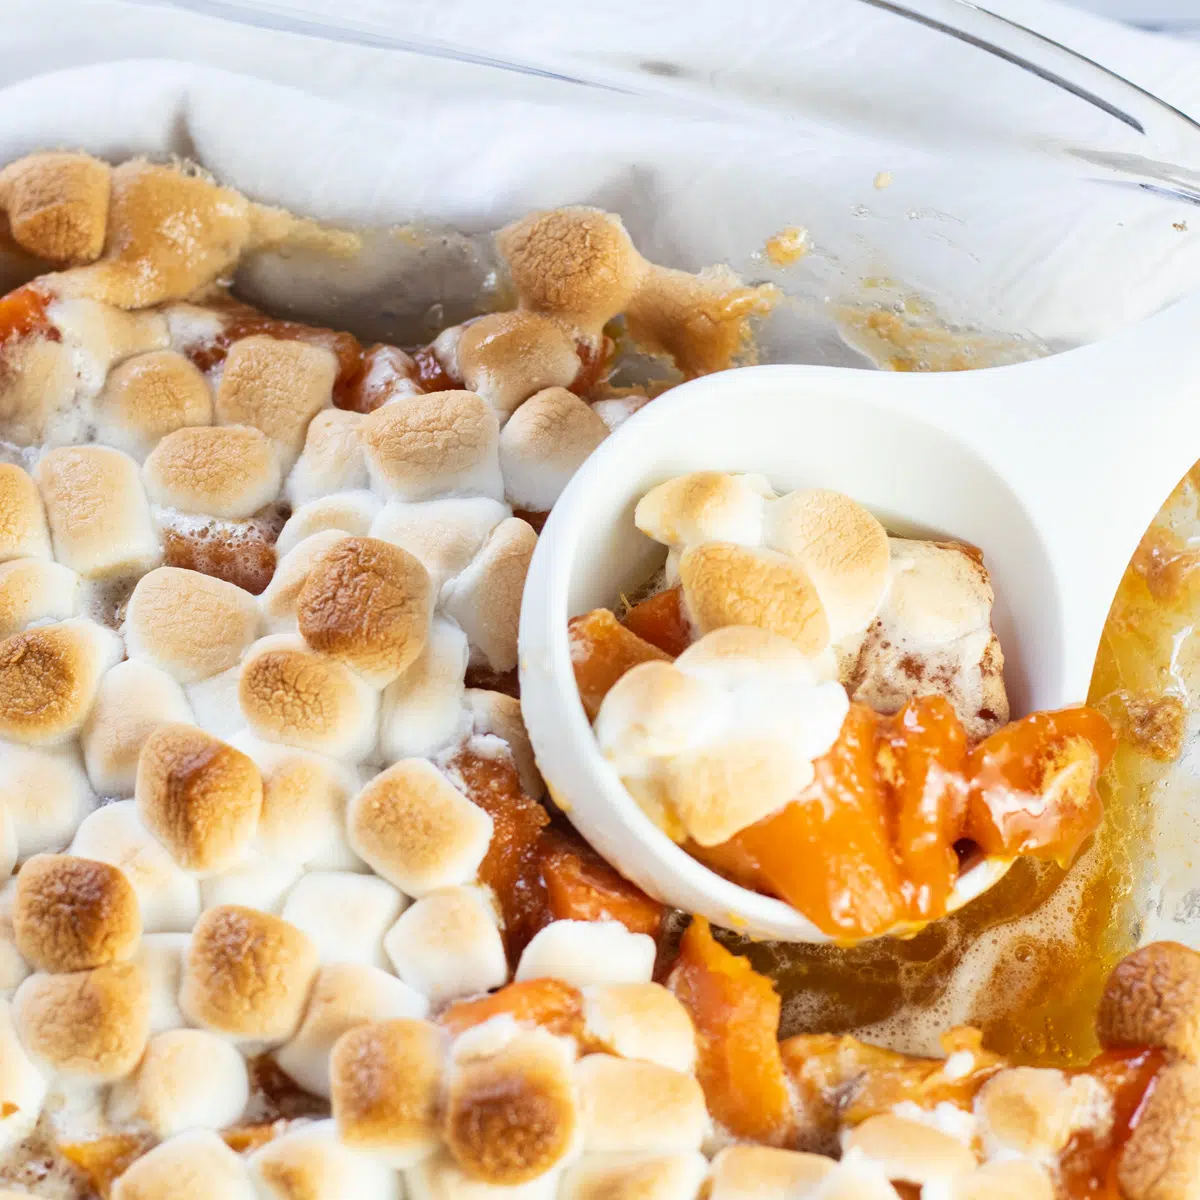 Candied yams with marshmallows in glass baking dish with white serving spoon.